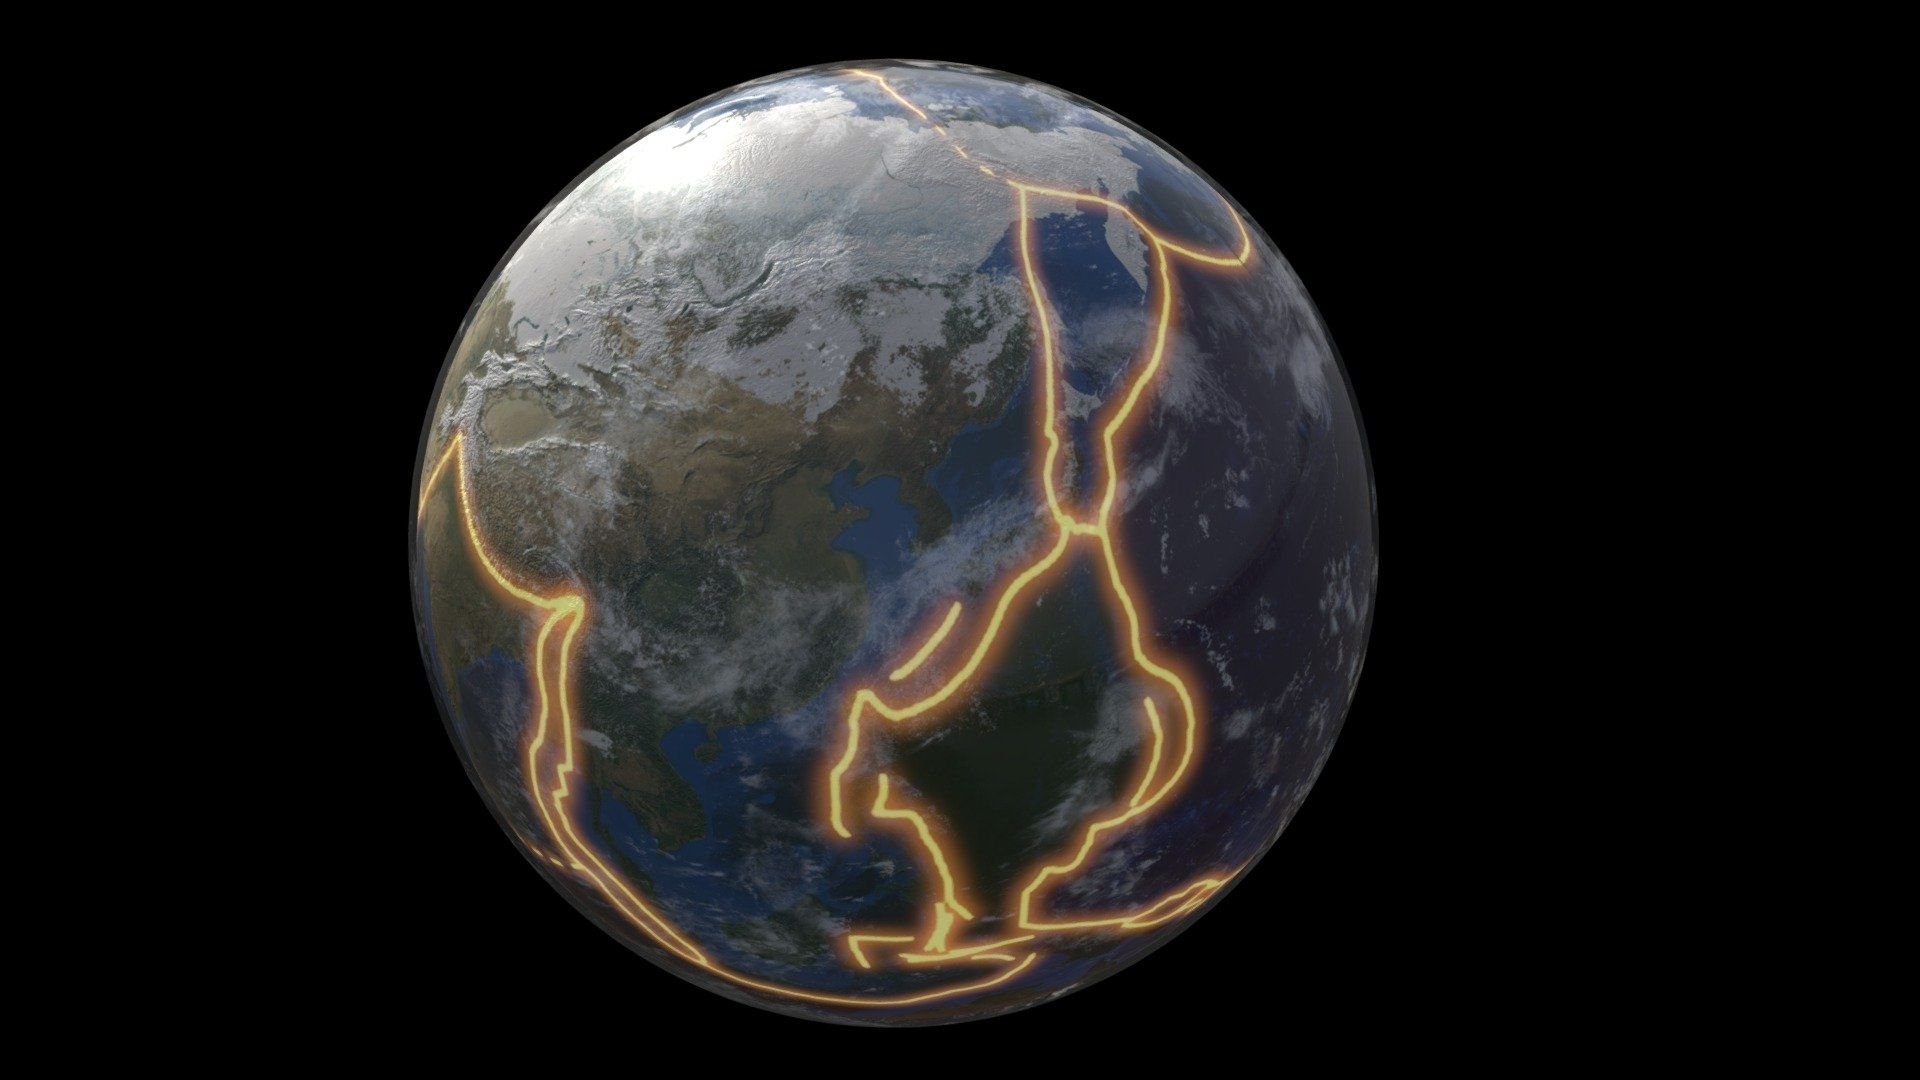 Tectonic Plates Mapped Onto The Earth's Surface